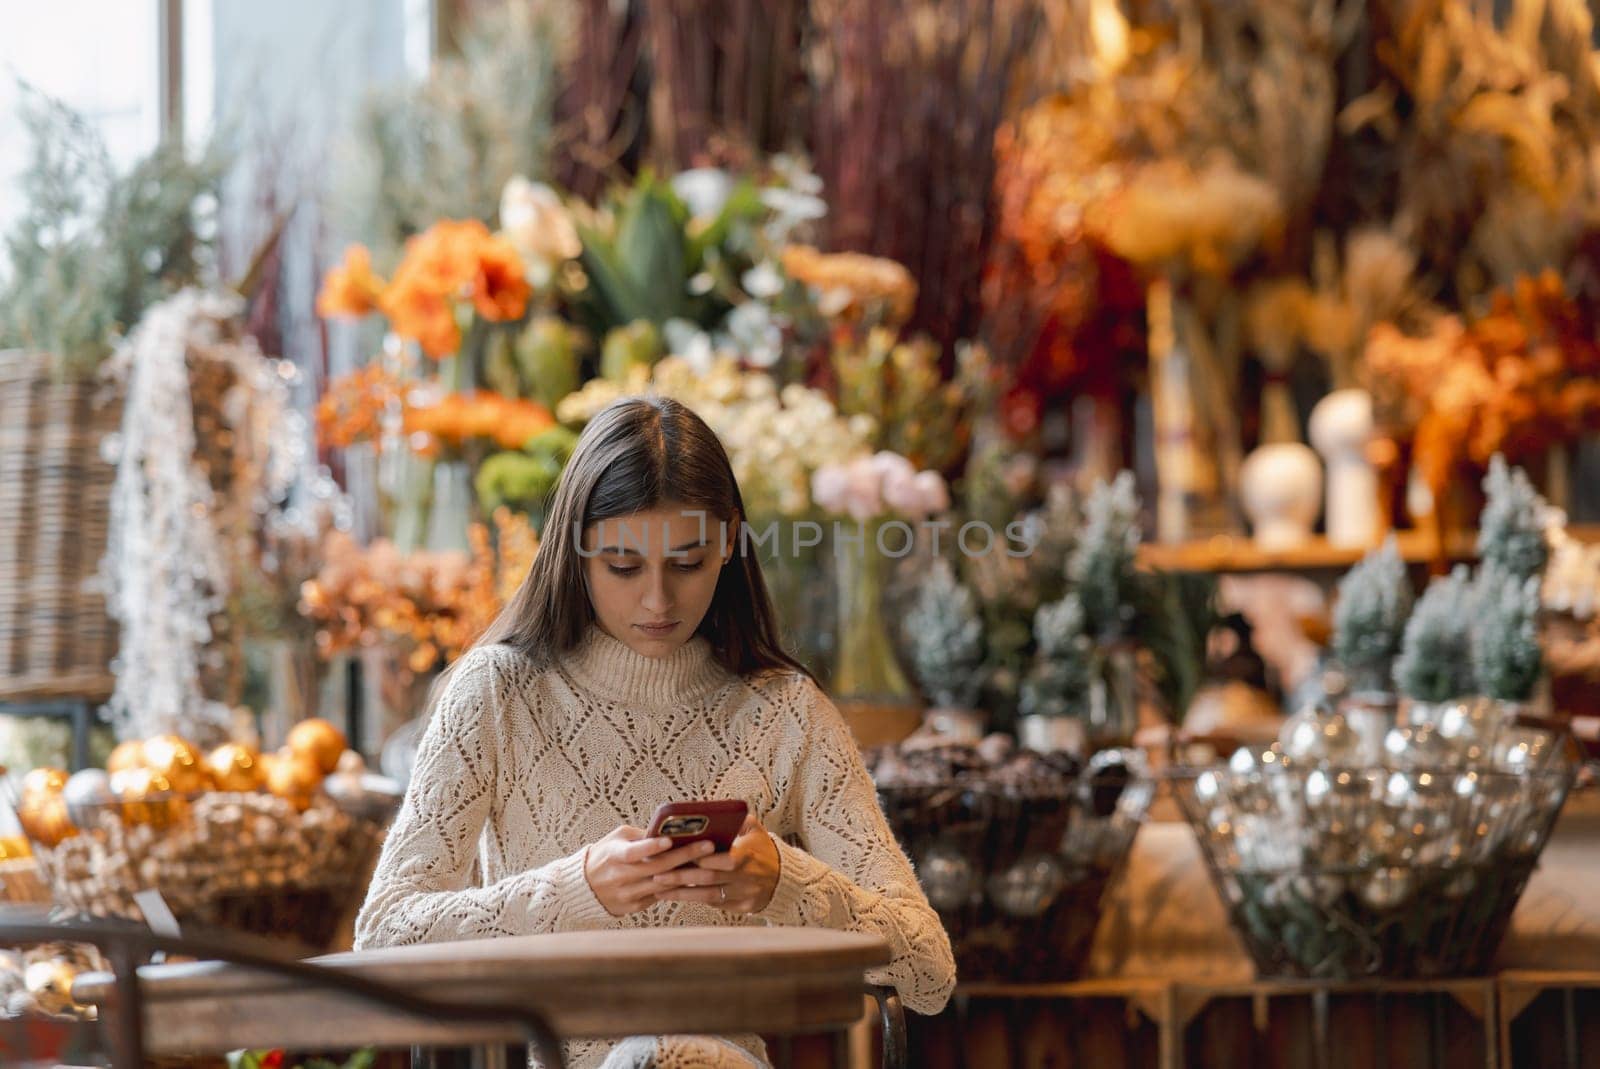 Exploring the decor shop, a young woman holds a phone in her hands. by teksomolika